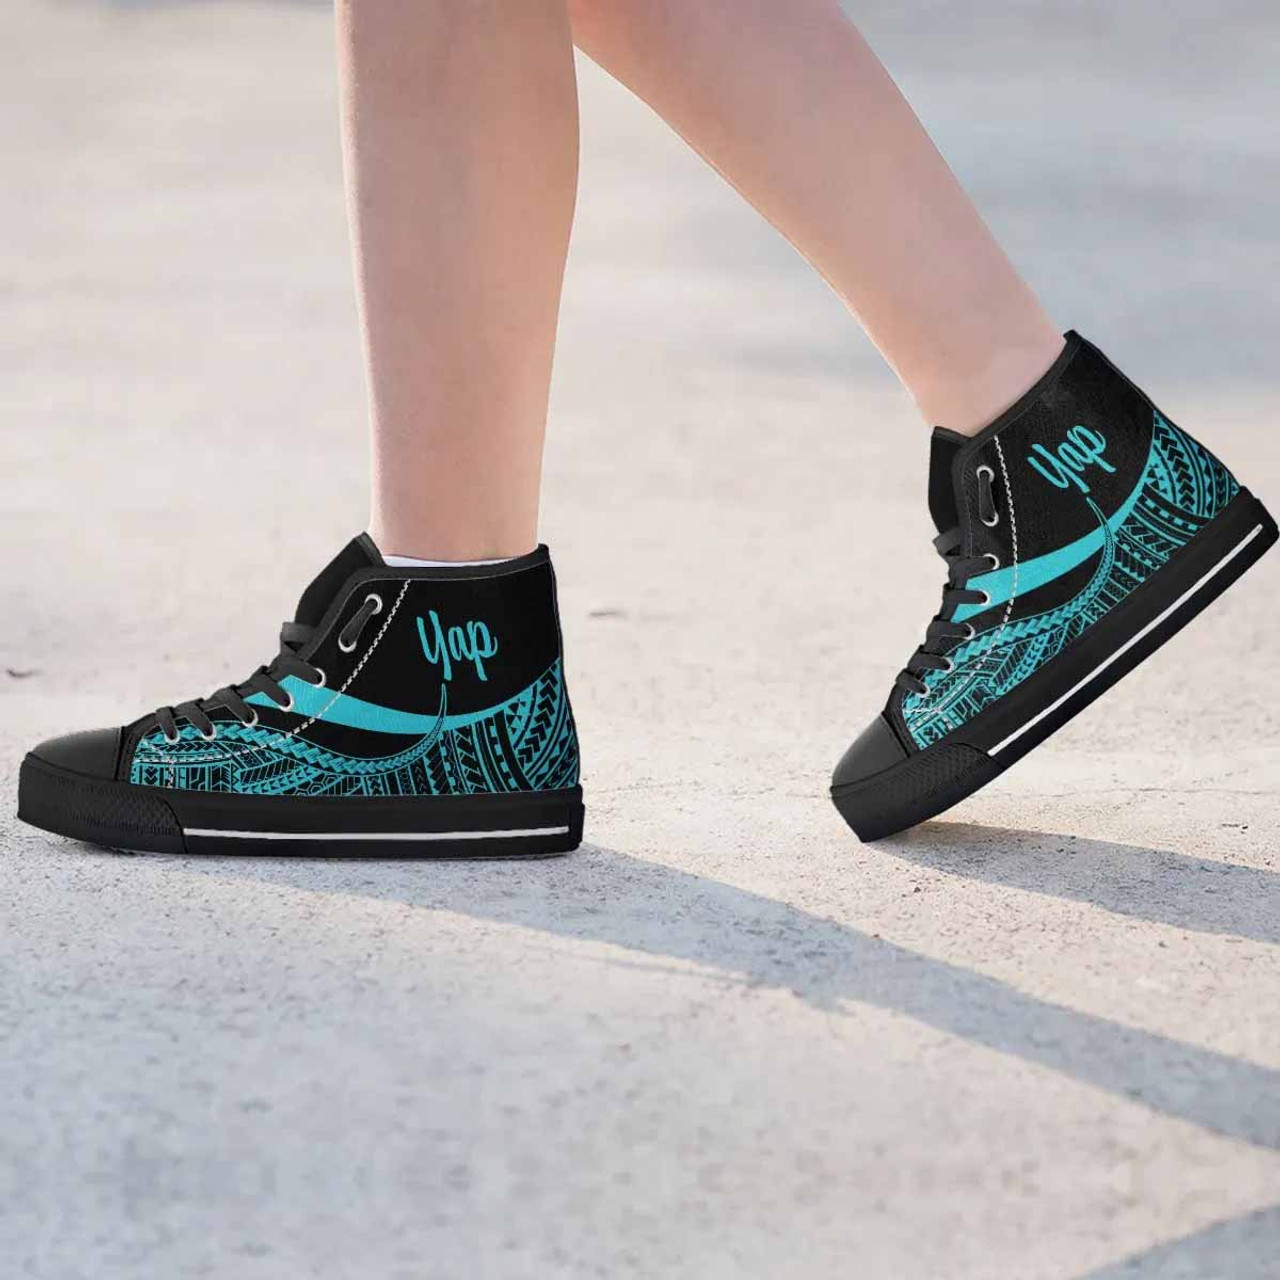 Yap High Top Shoes Turquoise - Polynesian Tentacle Tribal Pattern 4